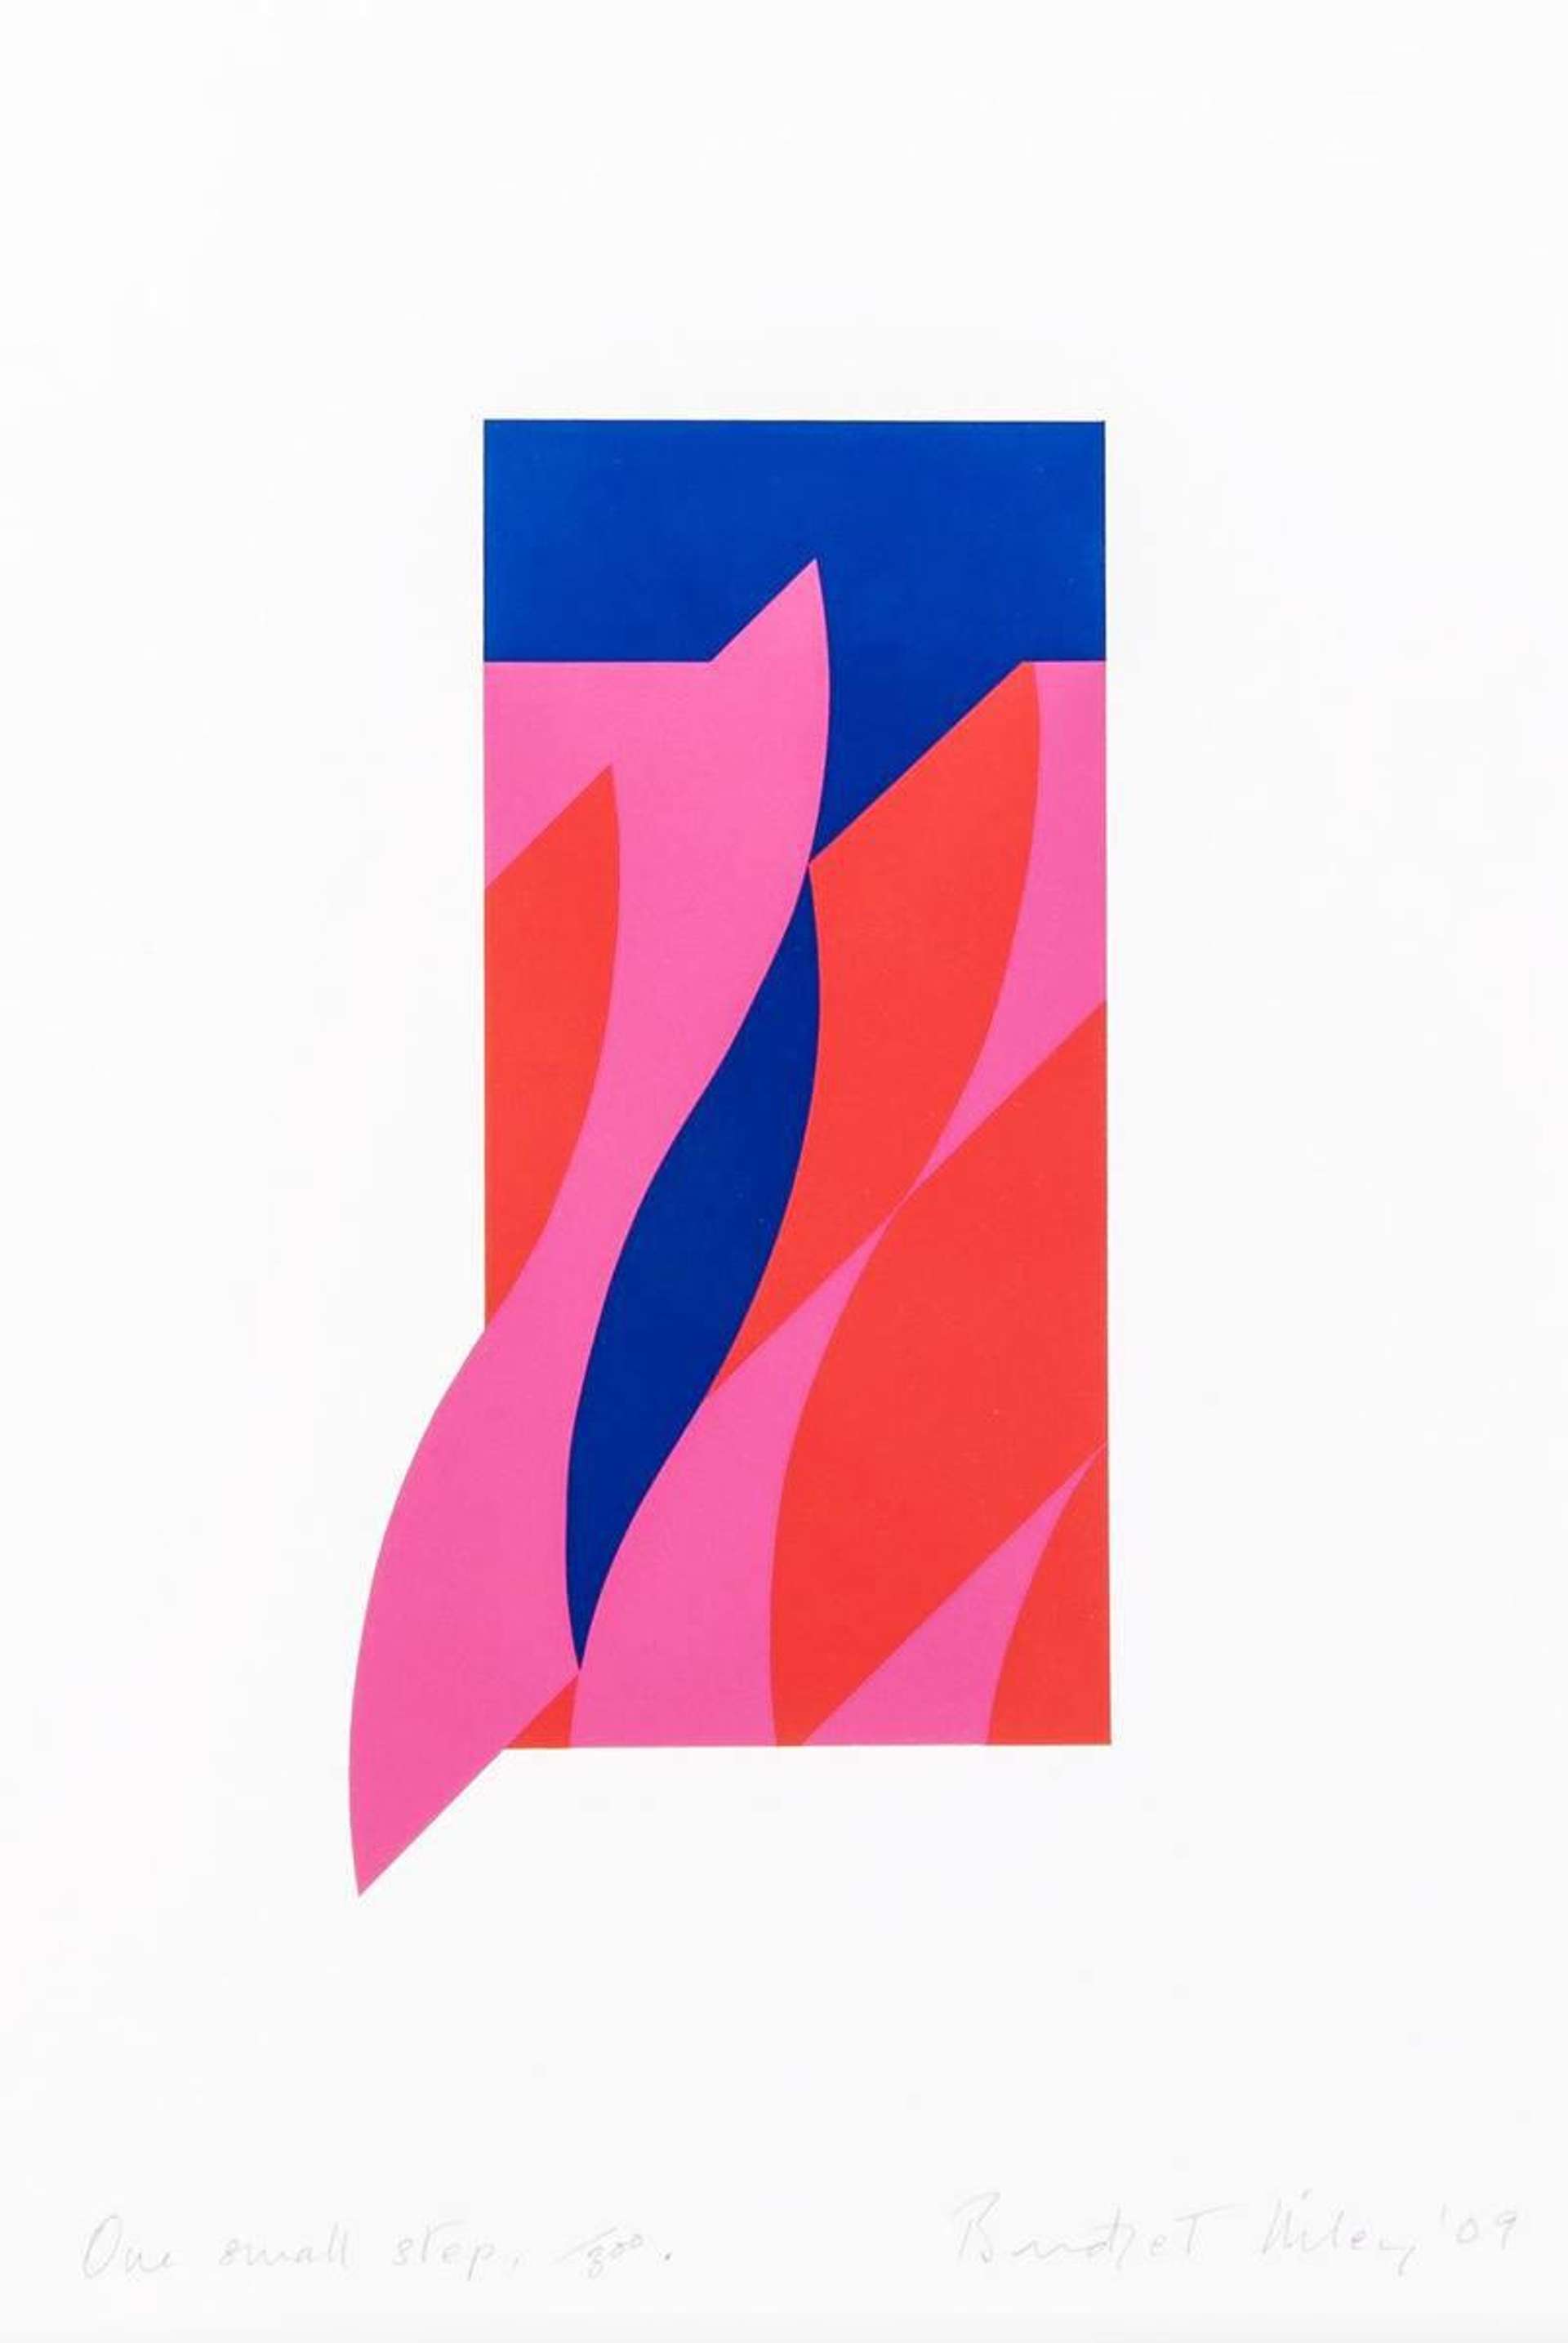 Geometric design featuring slightly curved shapes in a vertical position in moderately saturated tones of red, pink, and blue